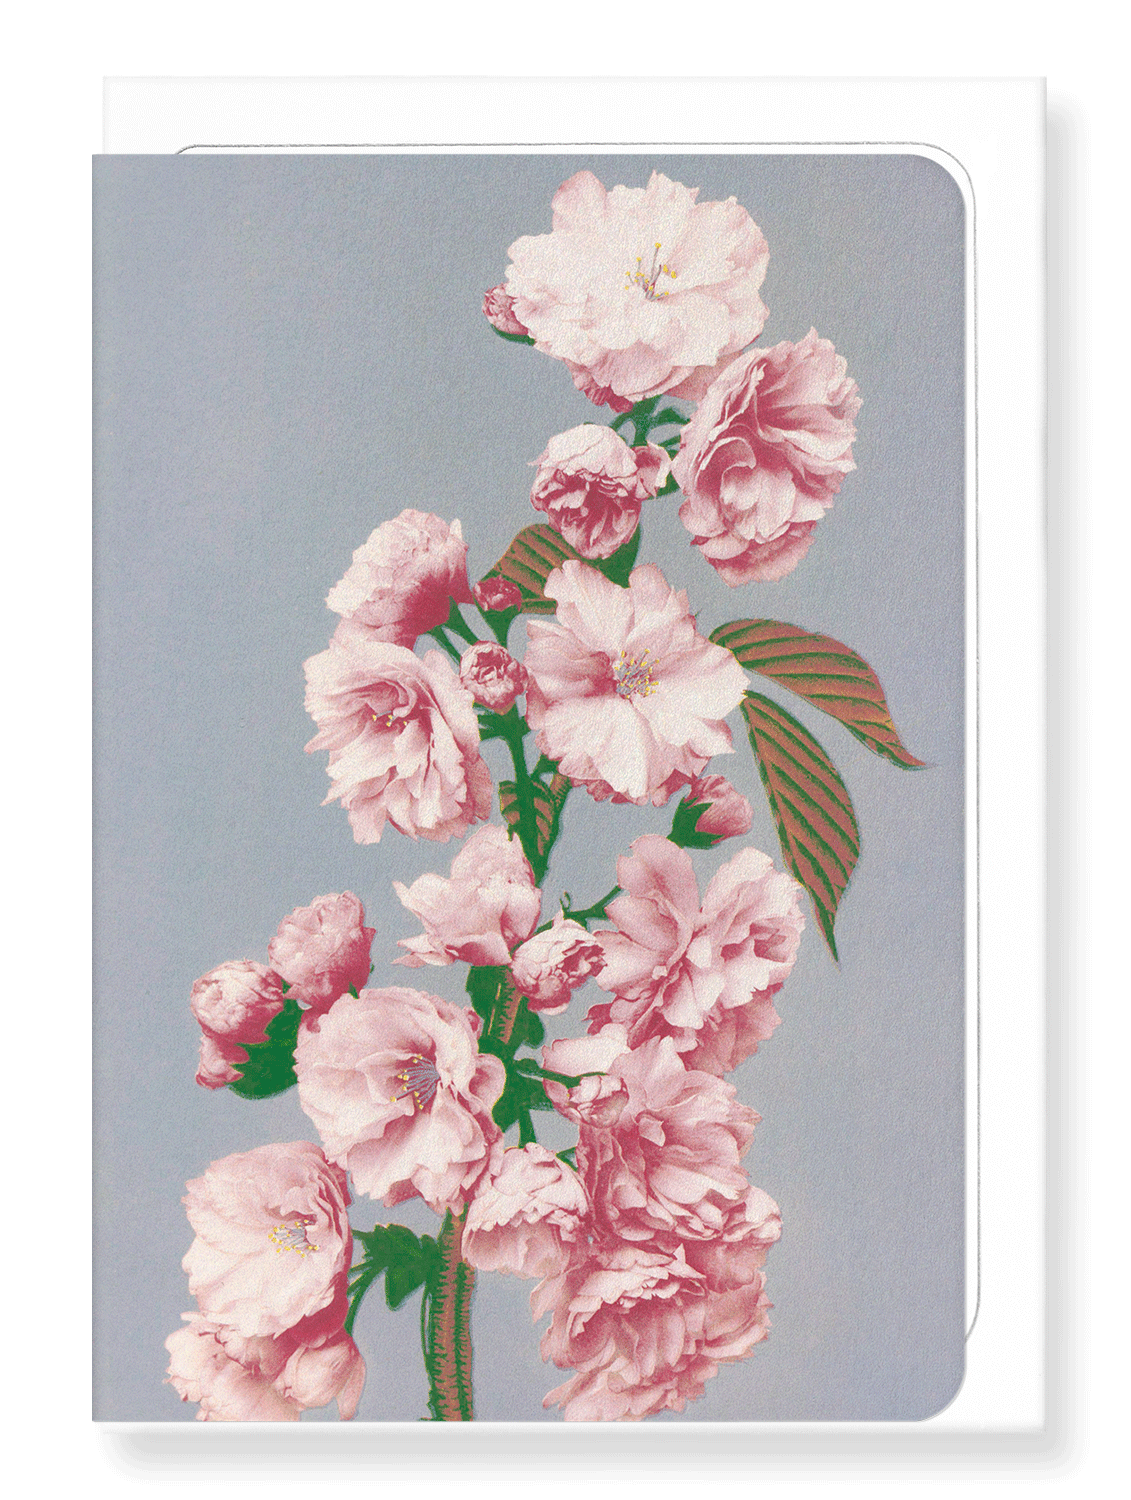 Ezen Designs - Photomechanical Print of Cherry Blossom (c.1890) - Greeting Card - Front